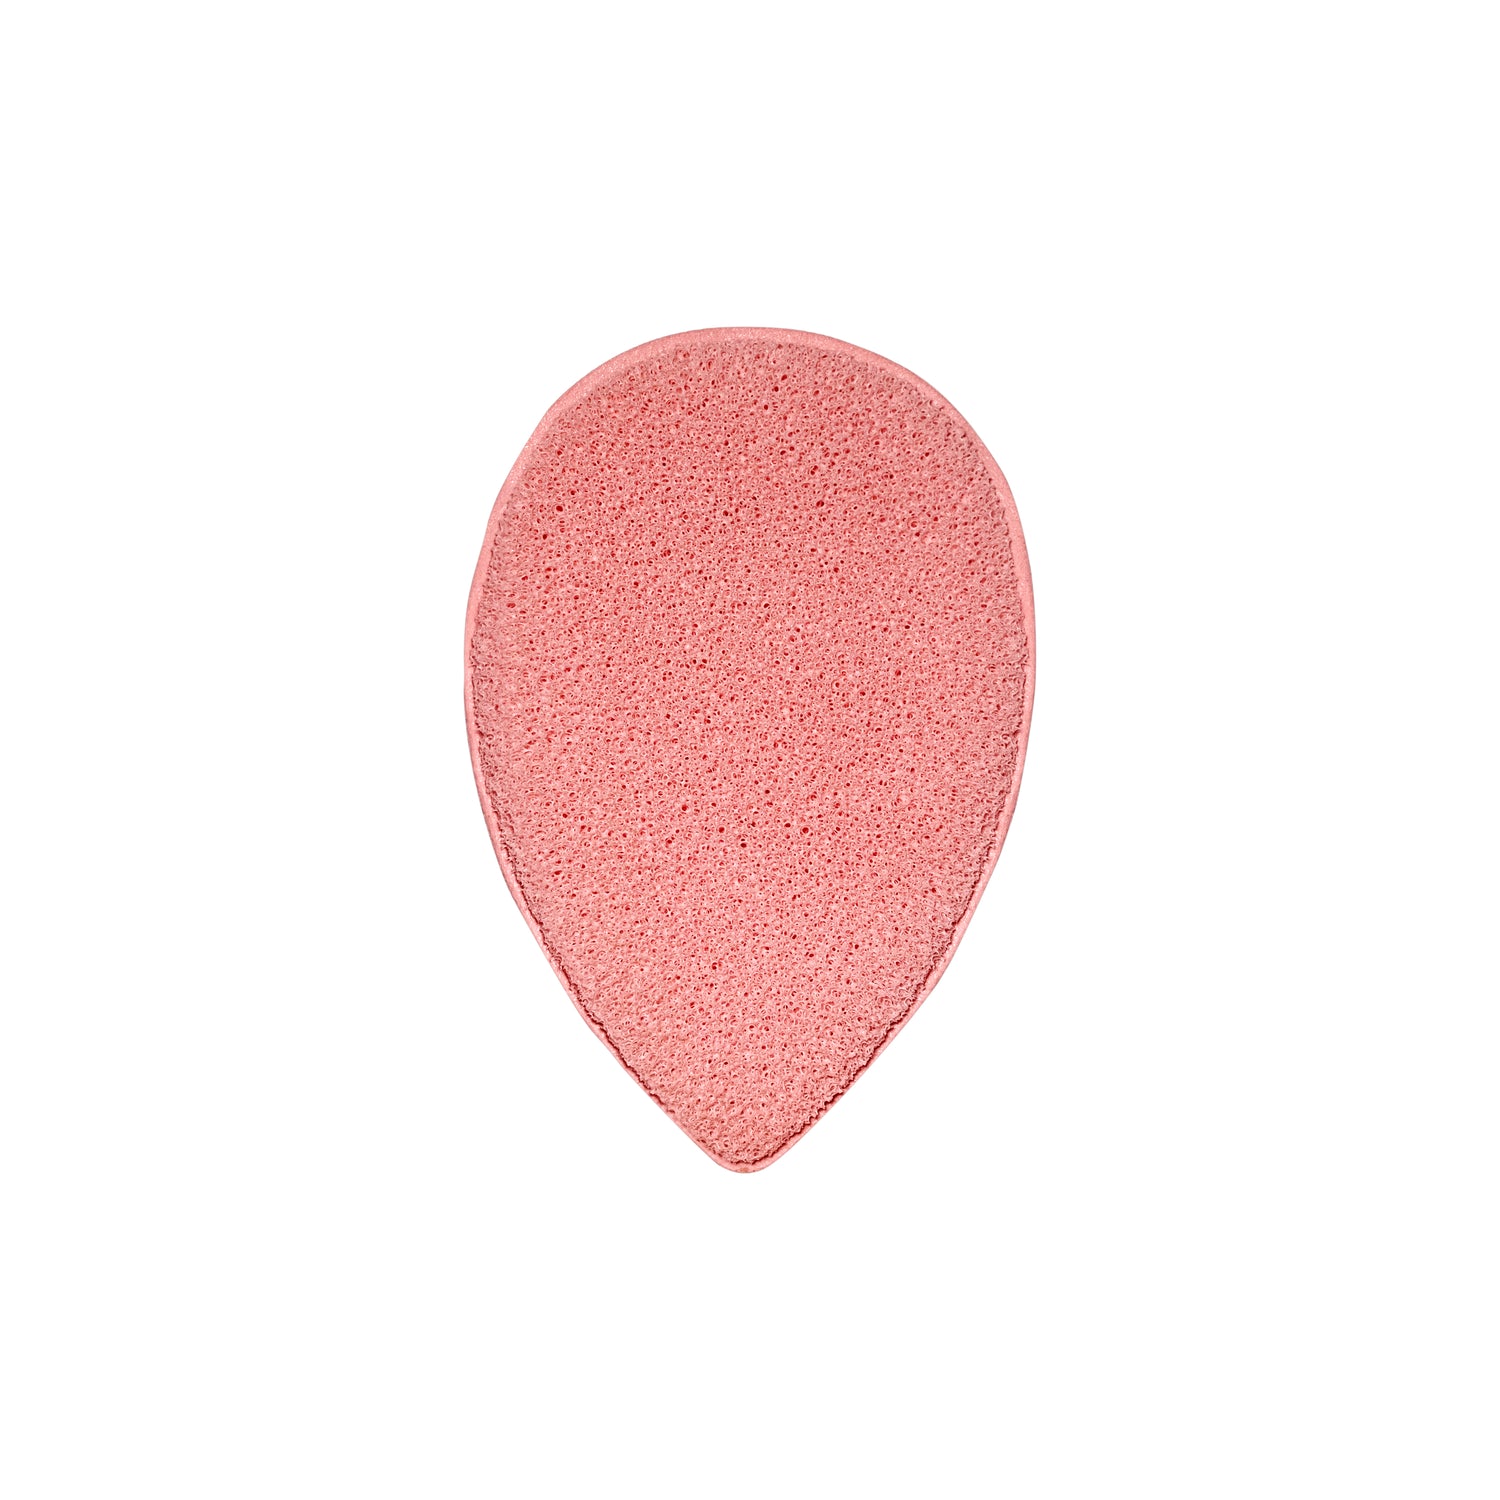 Pro Facial Cleaning Sponge Pink